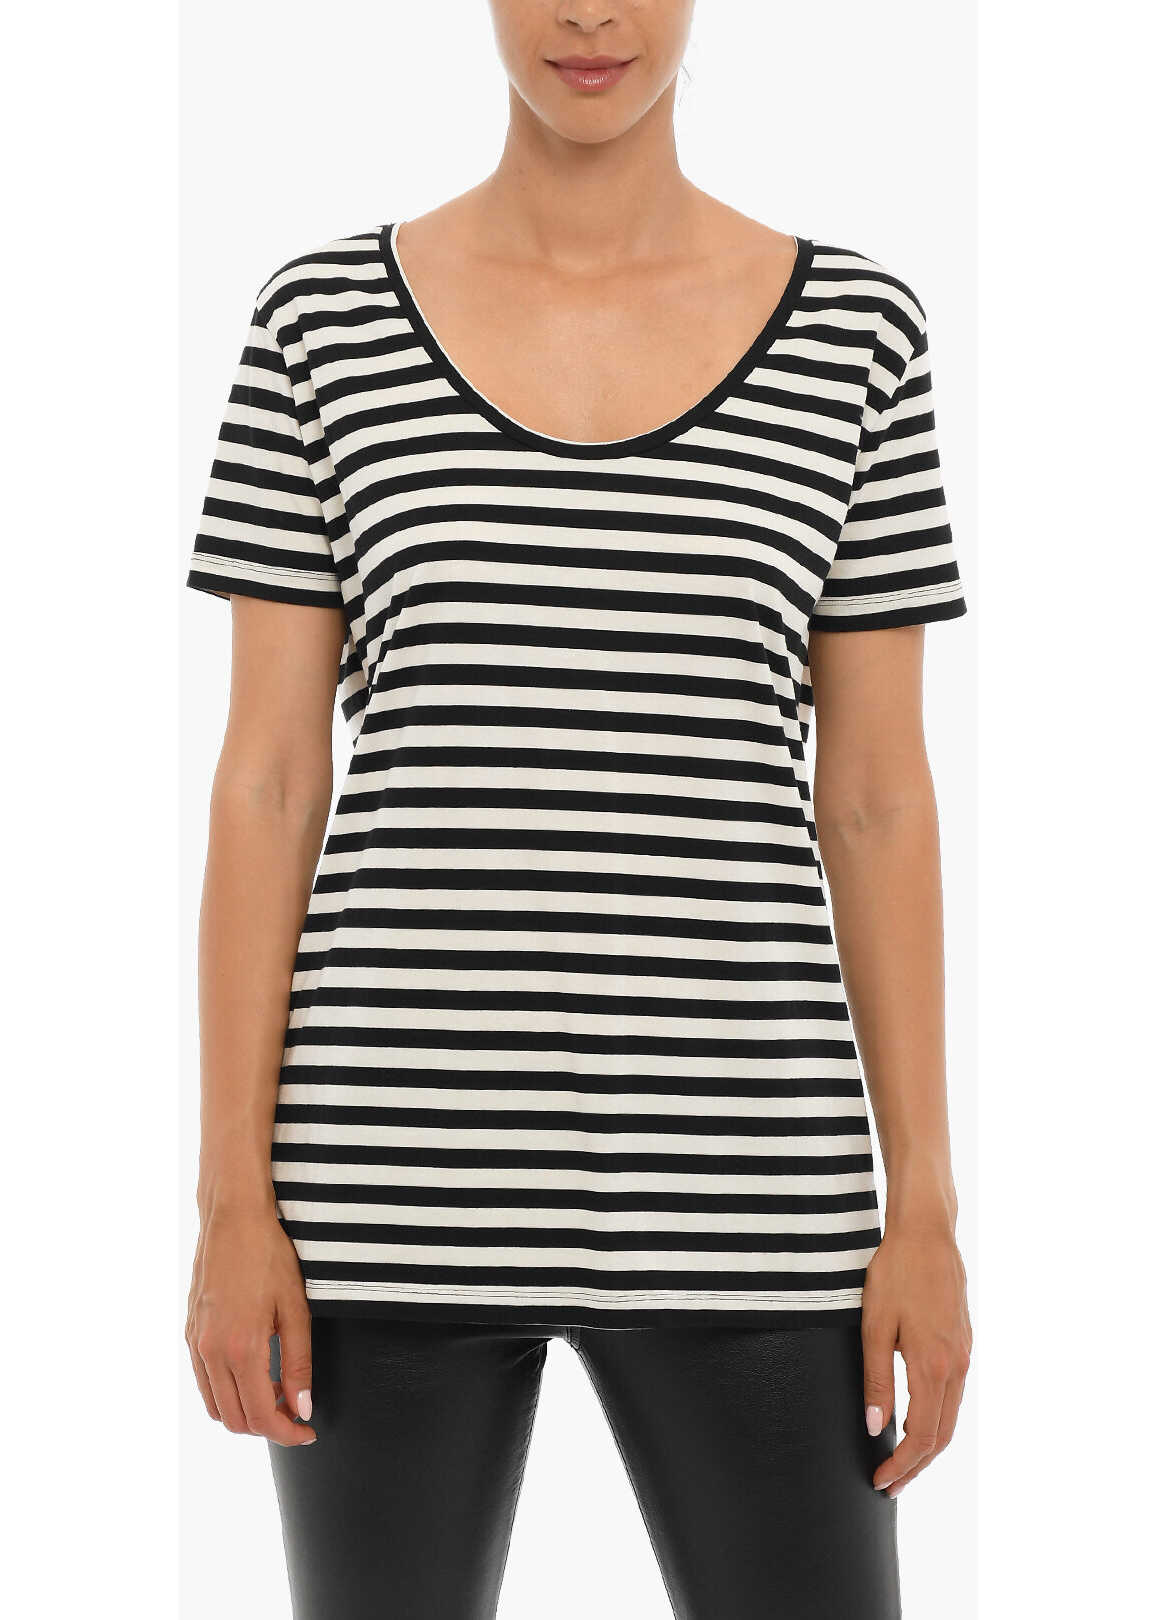 Woolrich Striped Cotton T-Shirt With Back Print Black & White